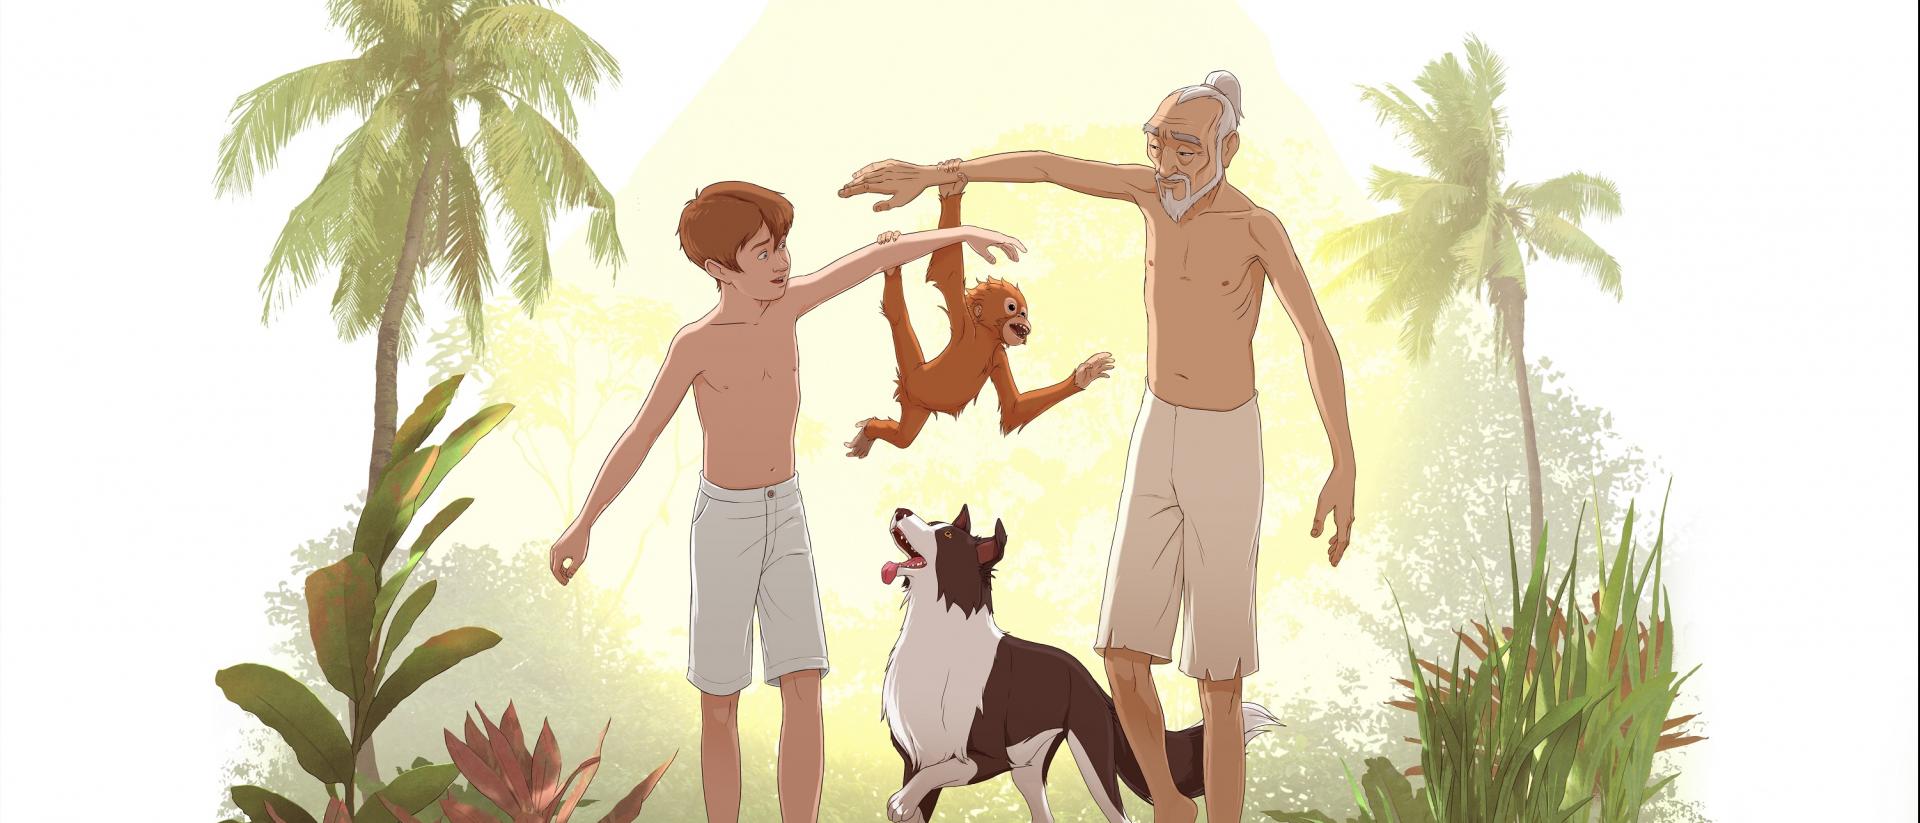 A still from animated film Kensuke's Kingdom, featuring a boy and an older man walking through a jungle with a dog. A small monkey hangs between them on their outstretched arms.